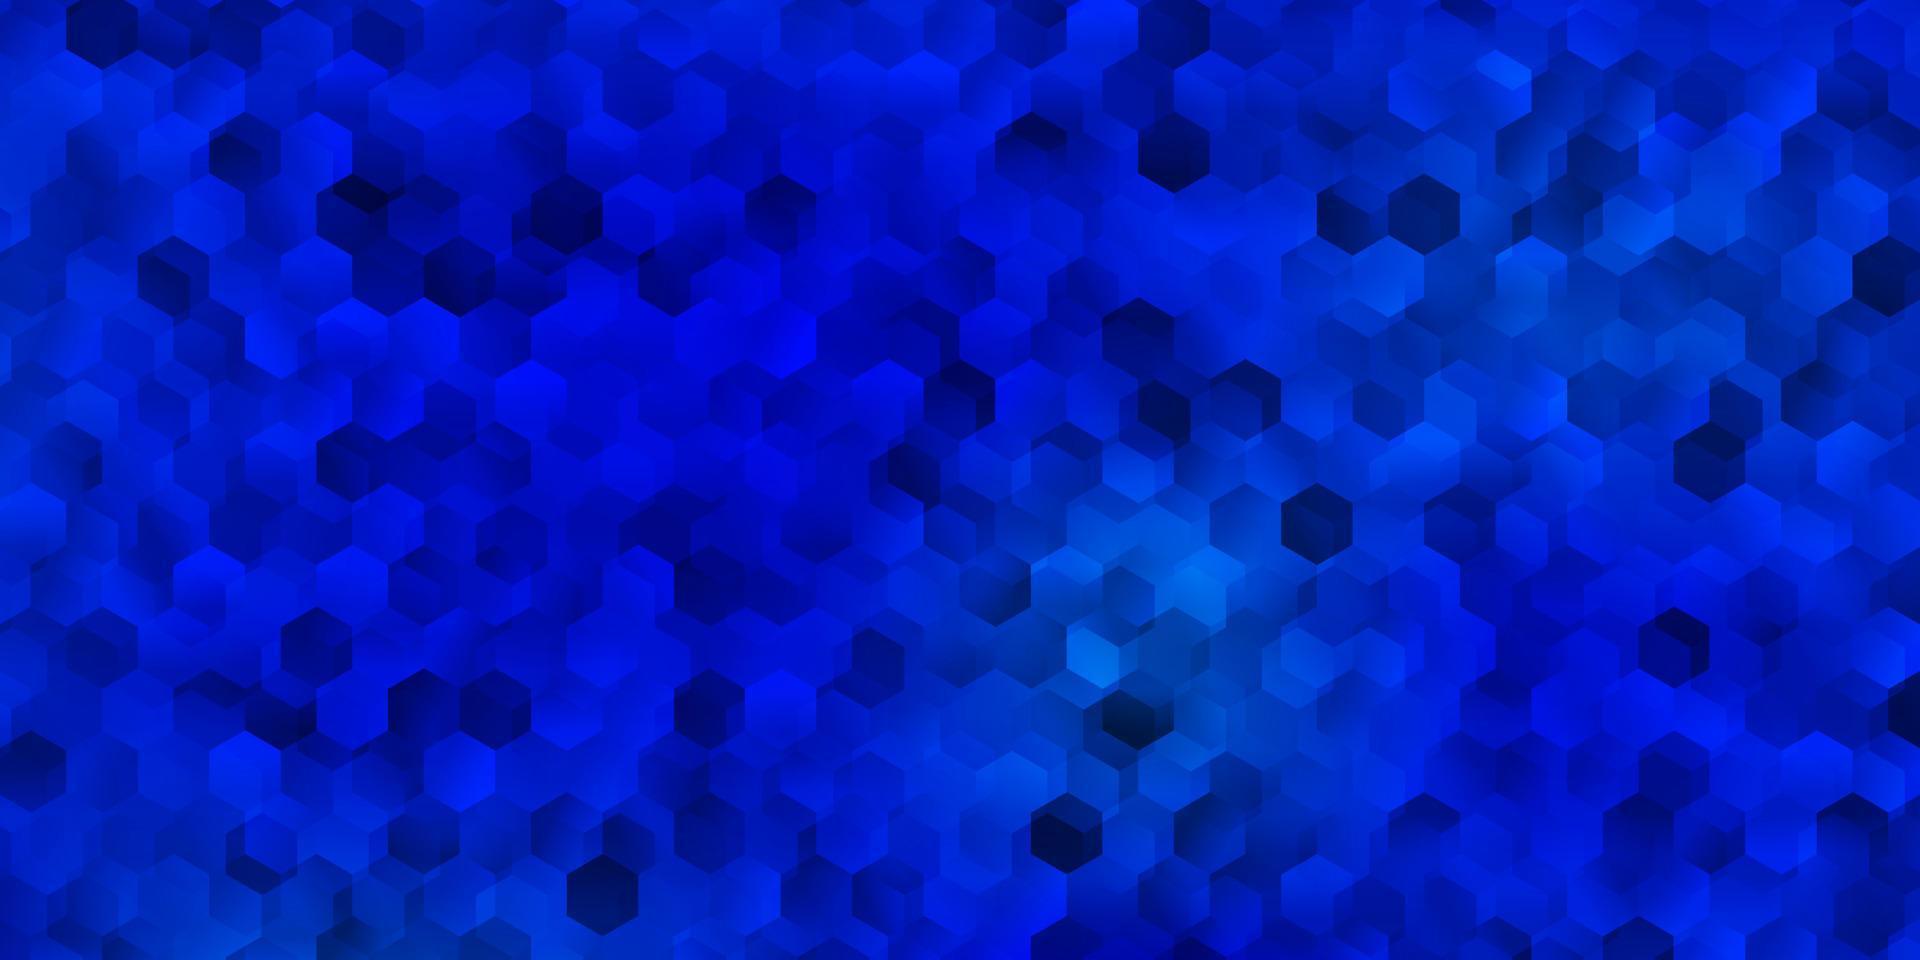 Light blue vector layout with shapes of hexagons.